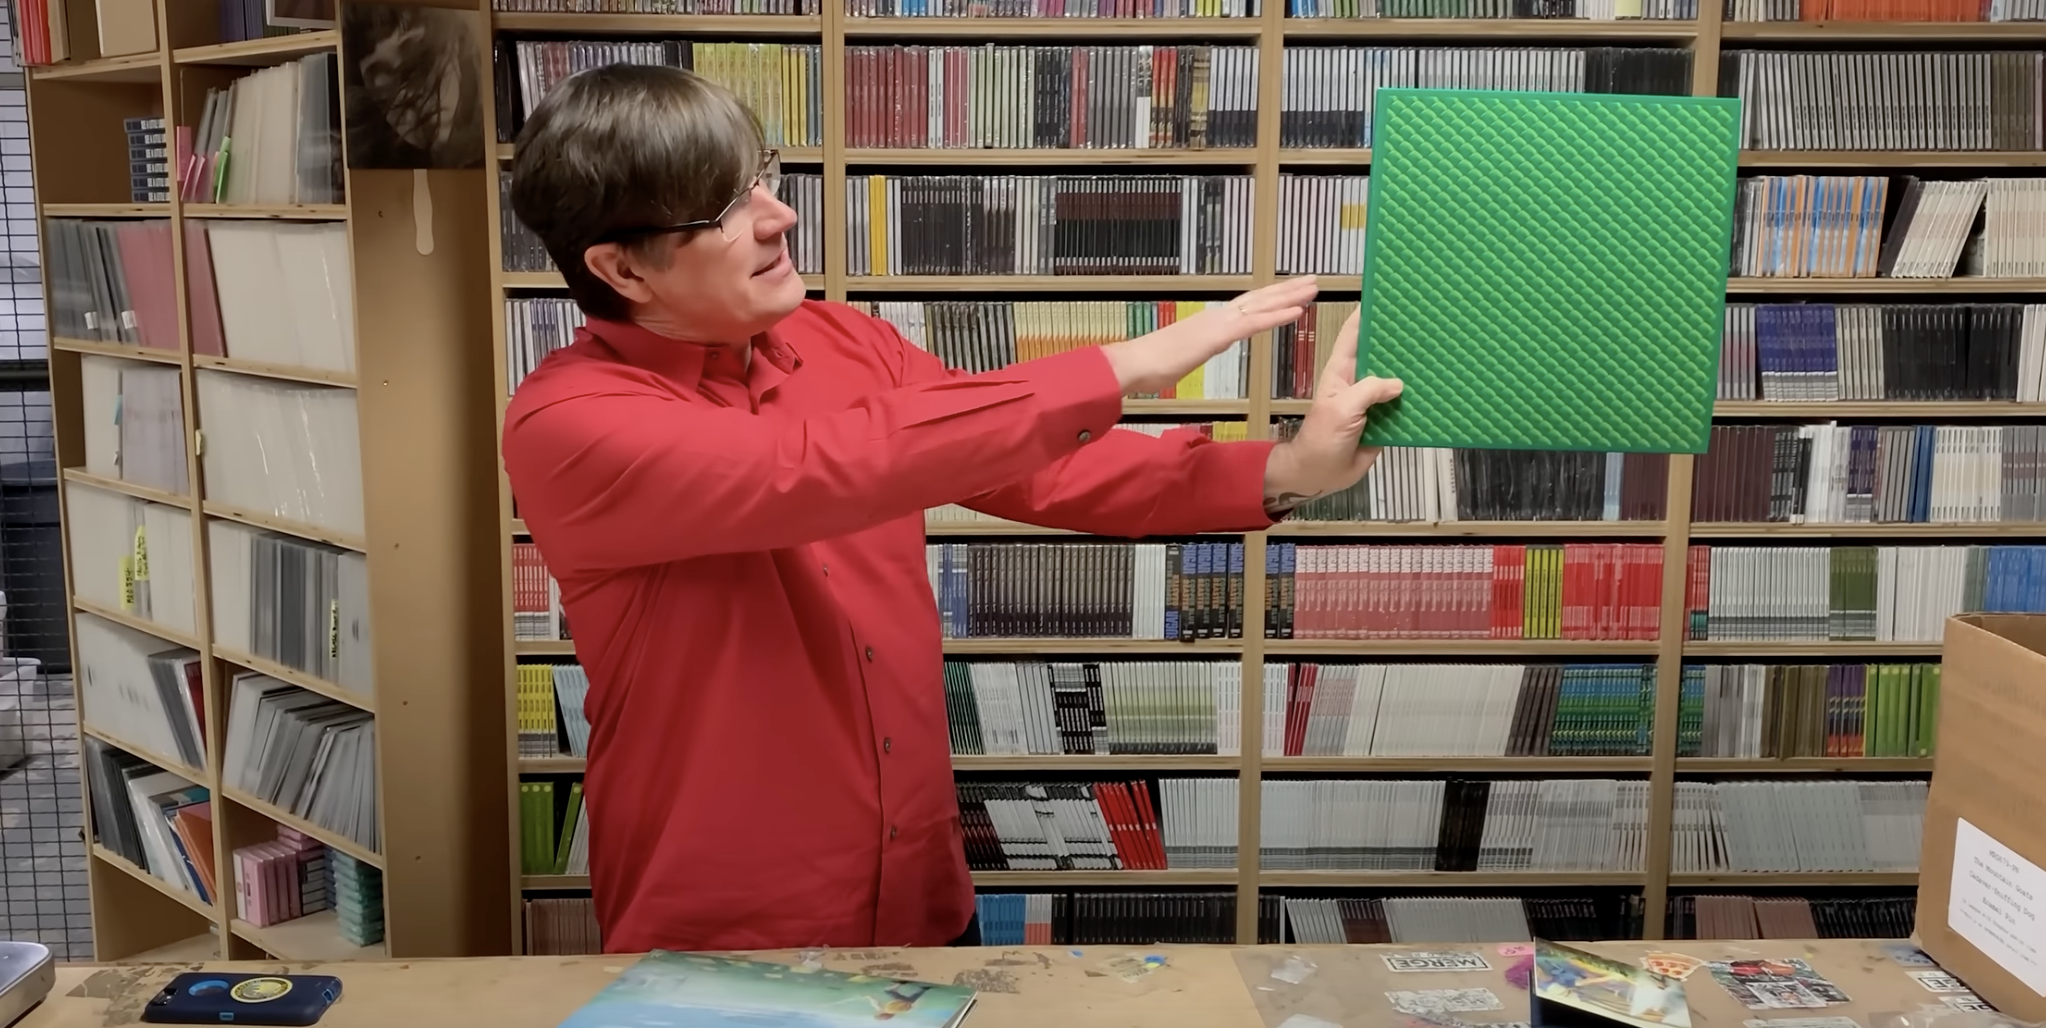 John Darnielle of the Mountain Goats holding up a limited edition LP of In League with Dragons with a shiny green slipcase that mimics dragon scales.